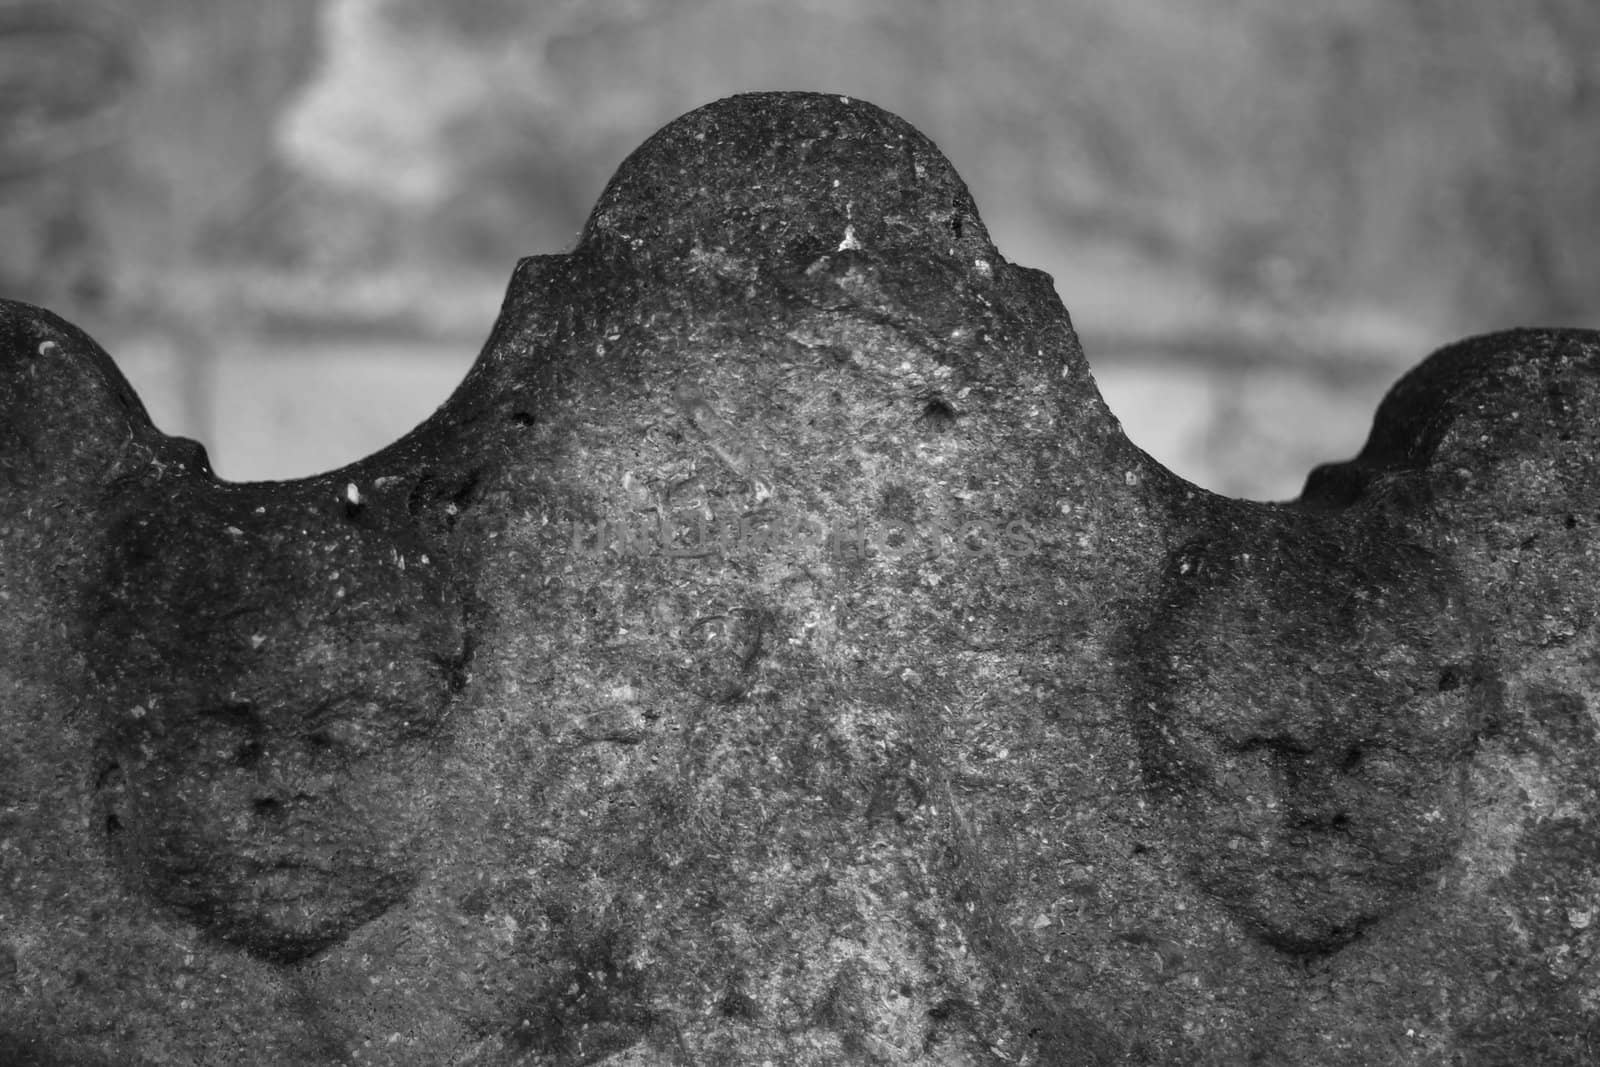 black and white image of a grave stone with the word "sacred to the memory of" lot of stone texture visible the deterioting heads of two old stone angels.